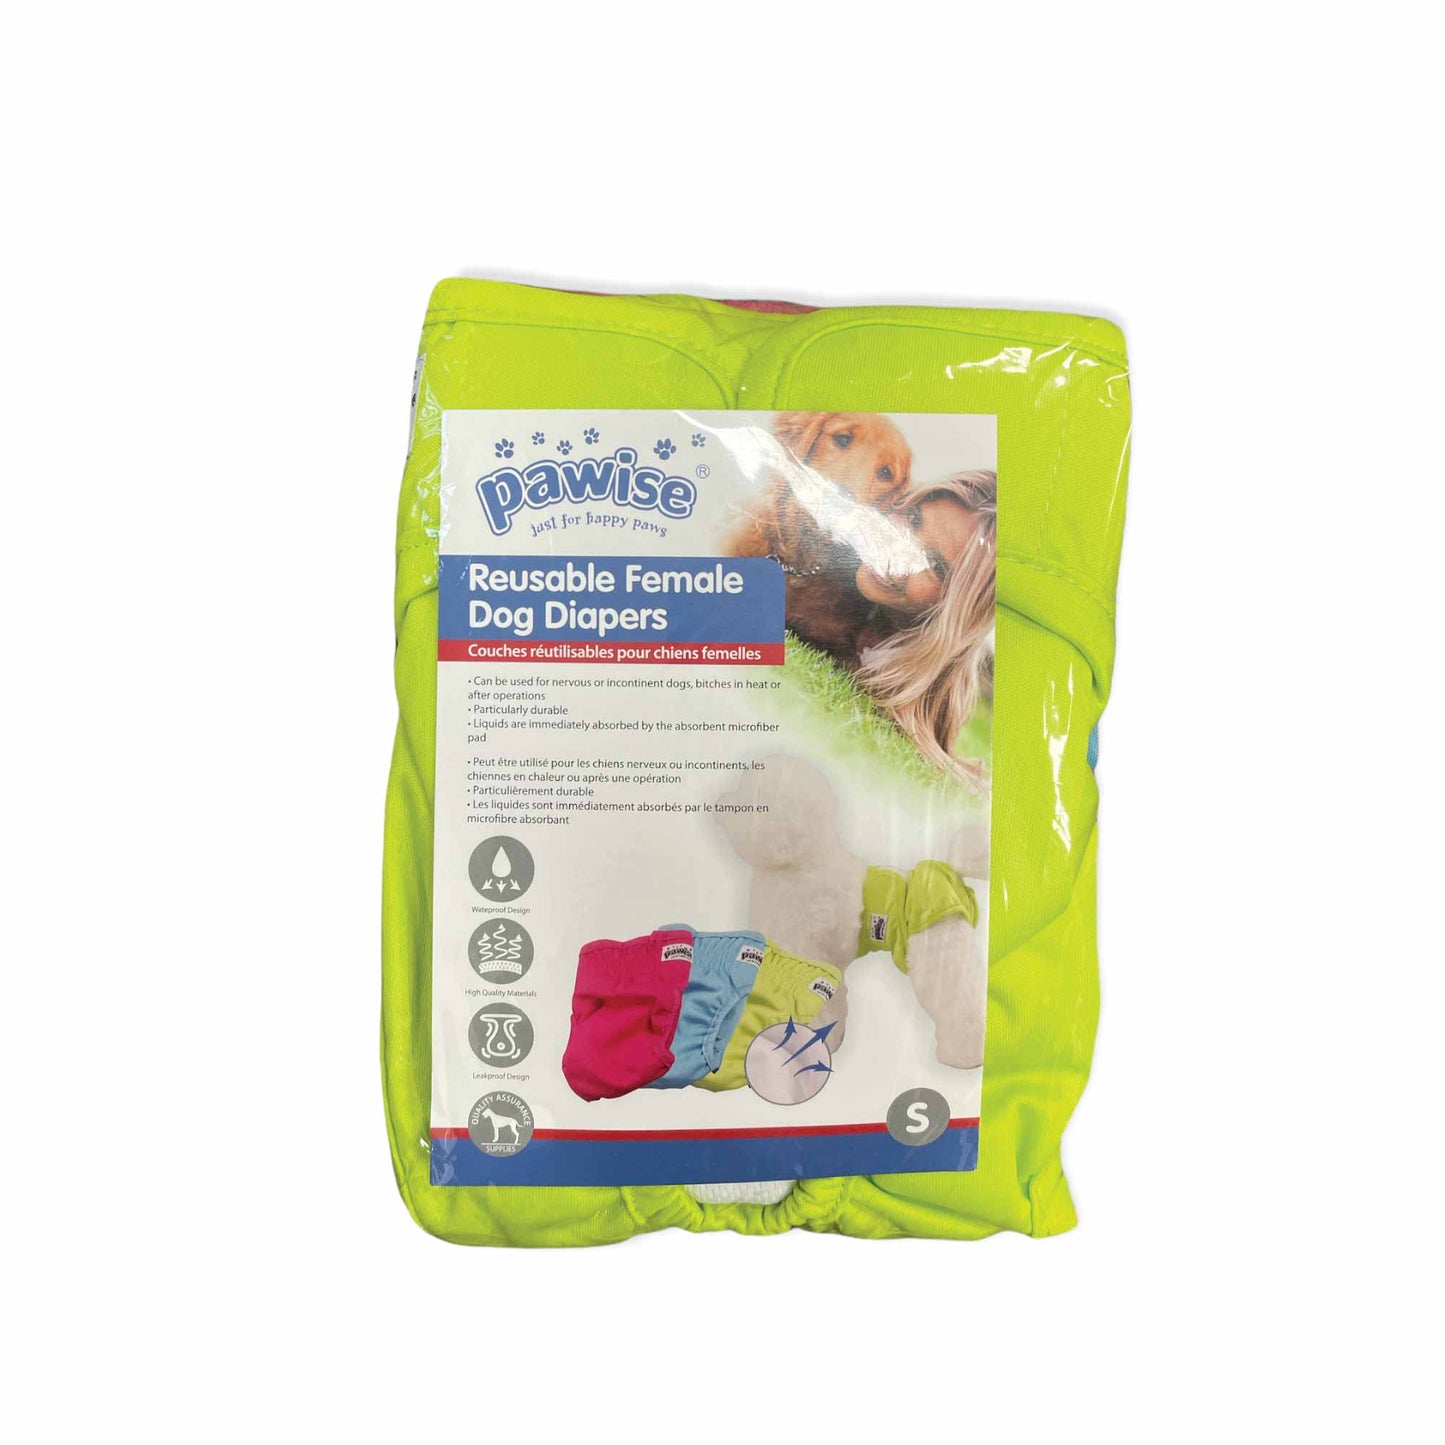 3 Pck Reusable Female Dog Diapers Puppy Nappy Eco Washable Period Incontinence Heat-11